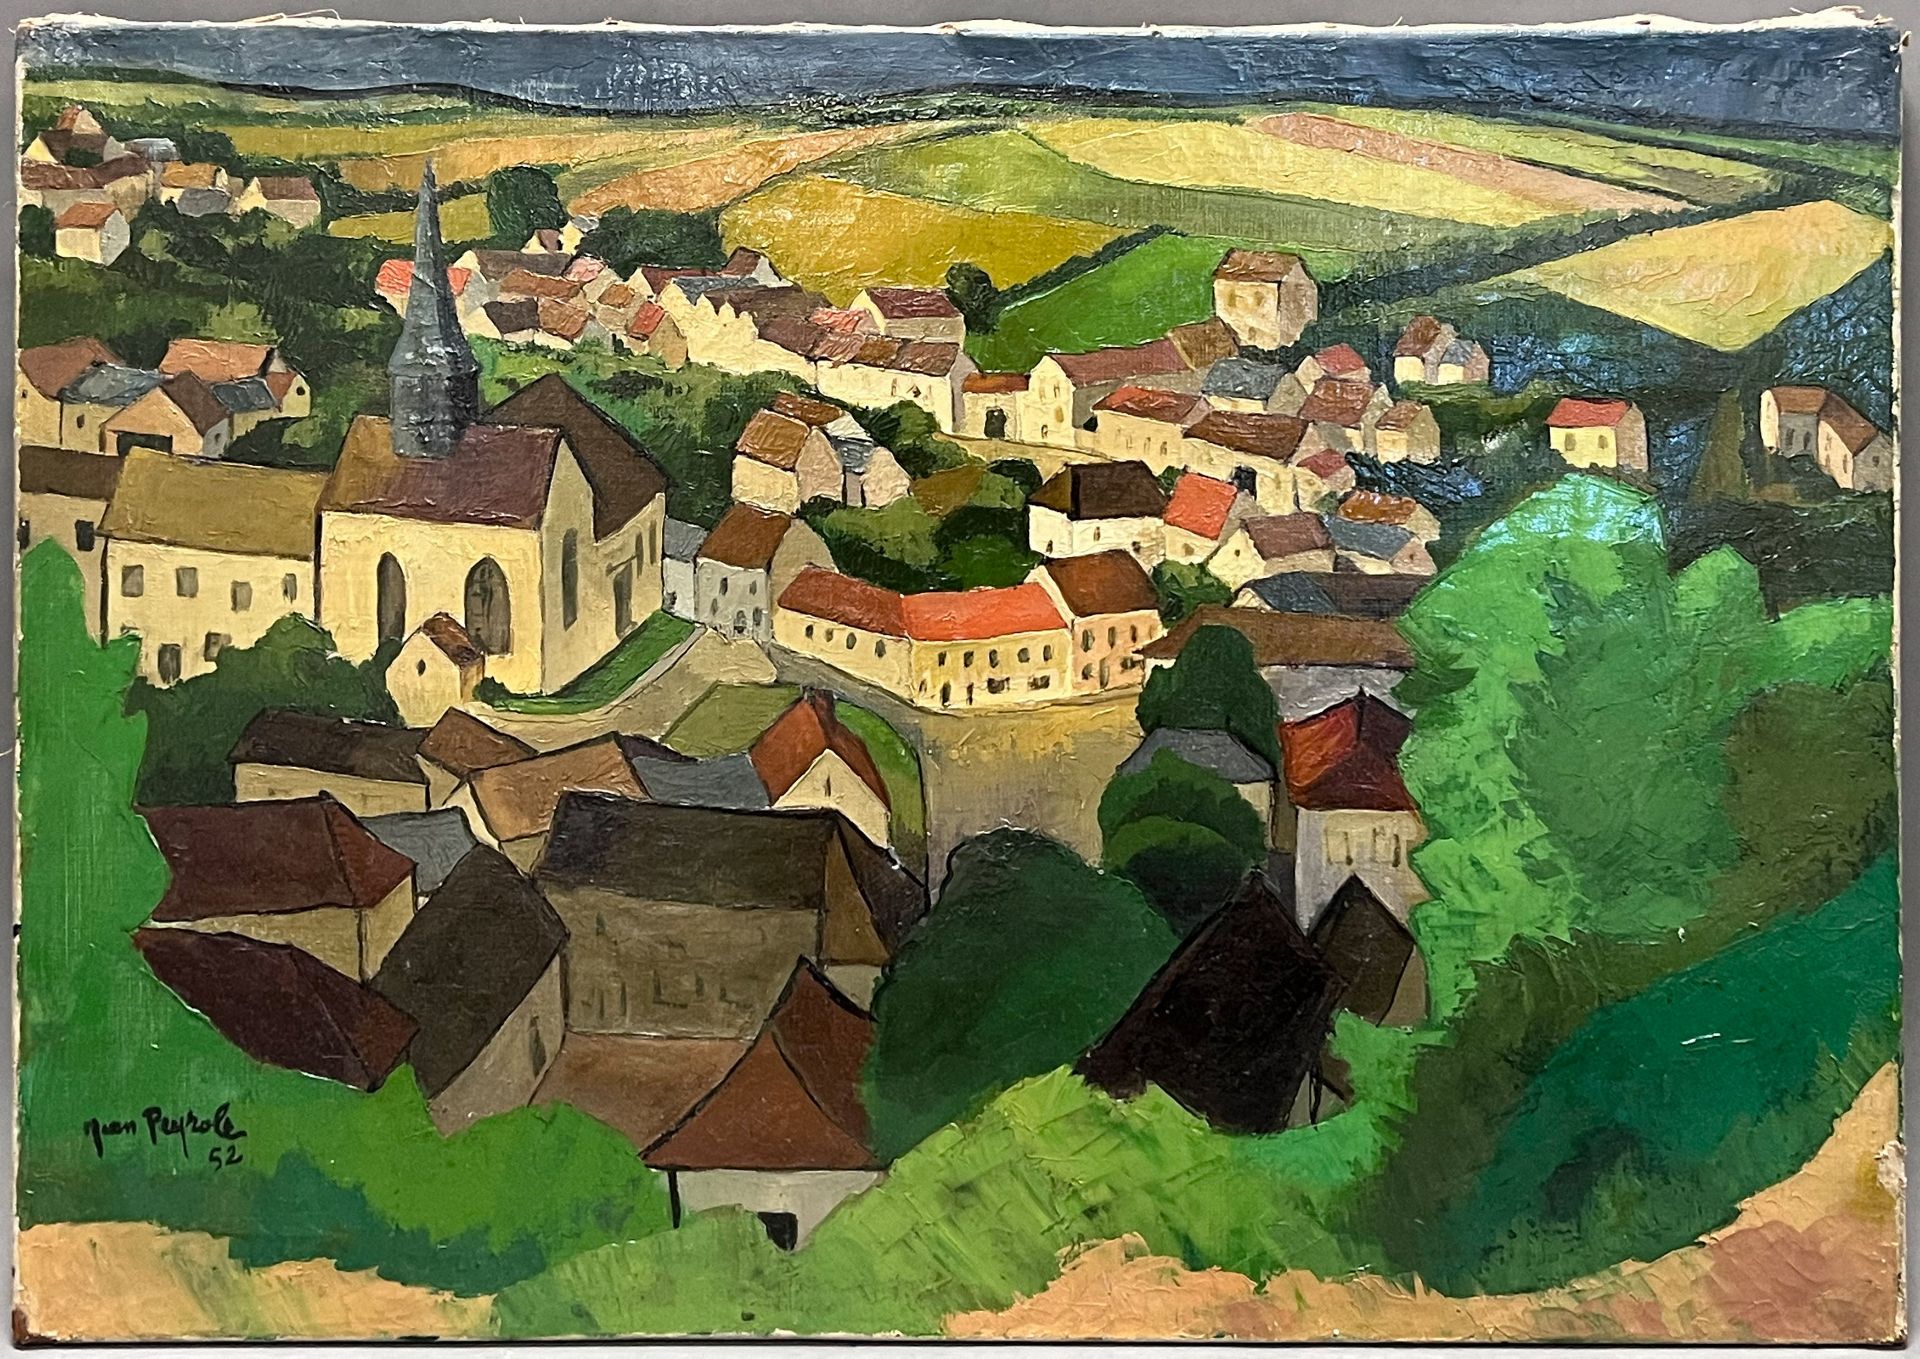 Jean PEYROLE (XX). View of a village. Probably in Lorraine. Dated 1952.